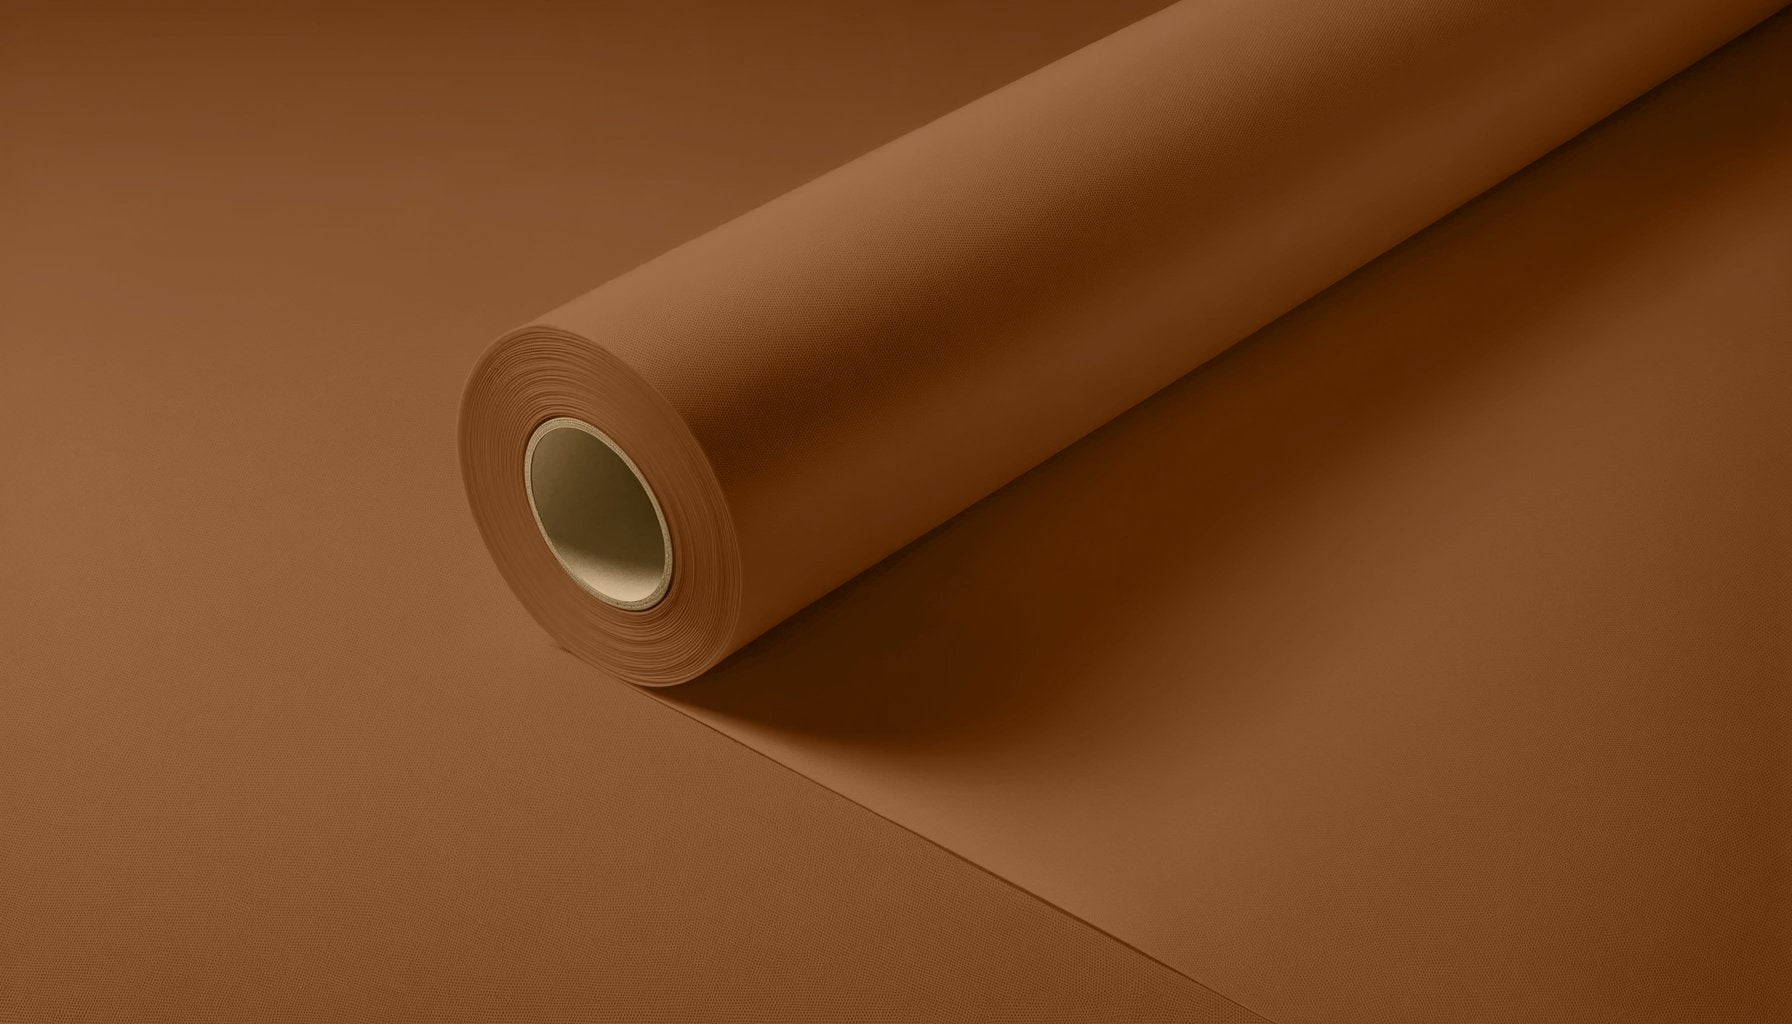 Peel & Stick Removable Re-usable Paint - Color RAL 8003 Clay Brown - offRAL™ - RALRAW LLC, USA